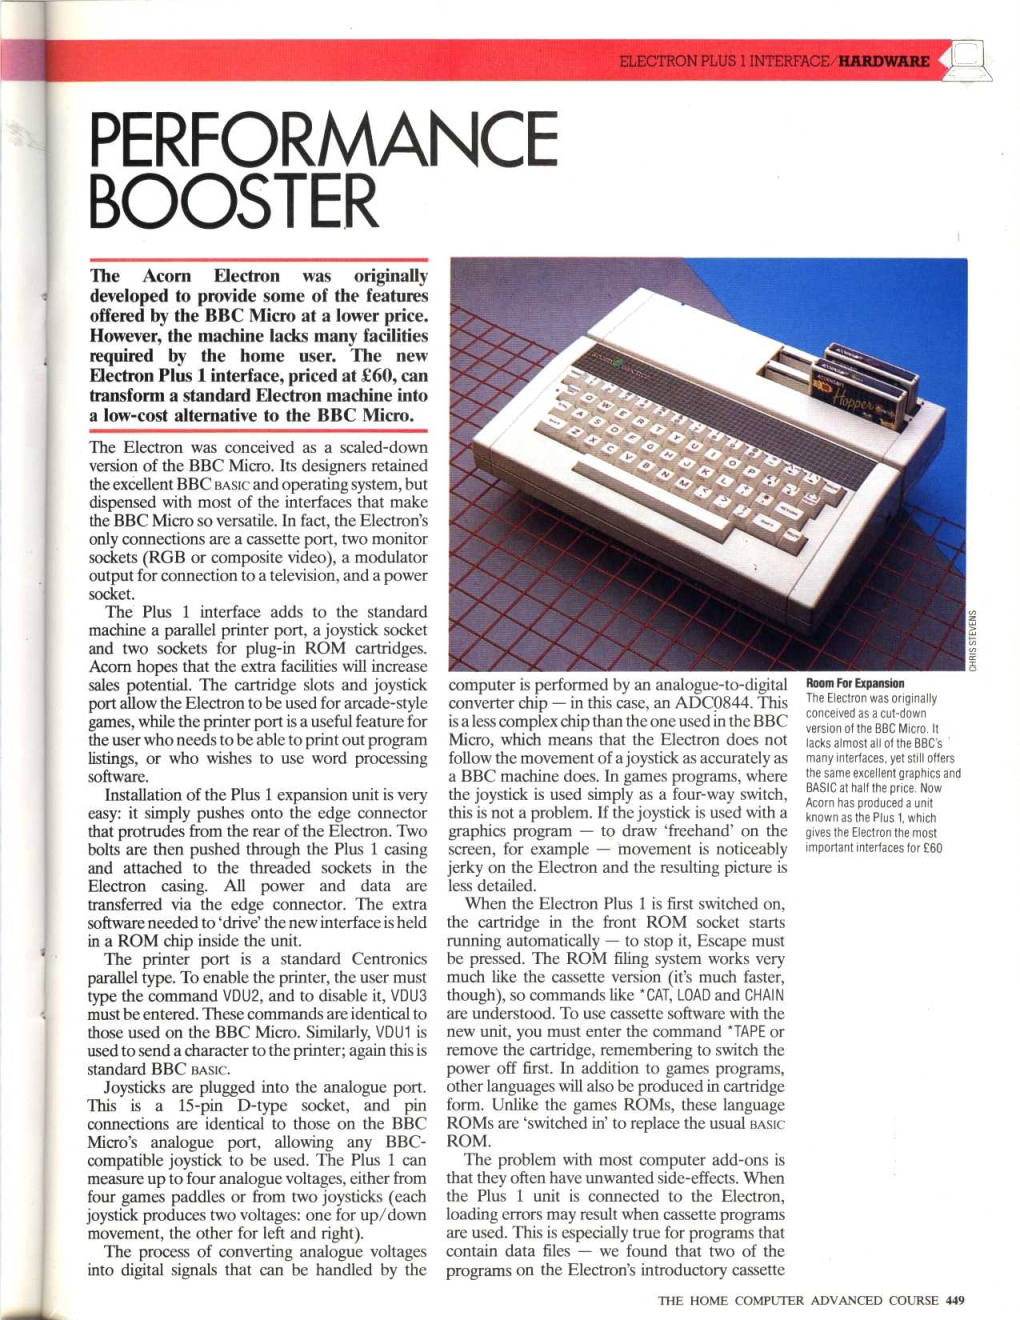 The Acorn Electron Was Originally Developed to Provide Some of the Features Offered by the BBC Micro at a Lower Price